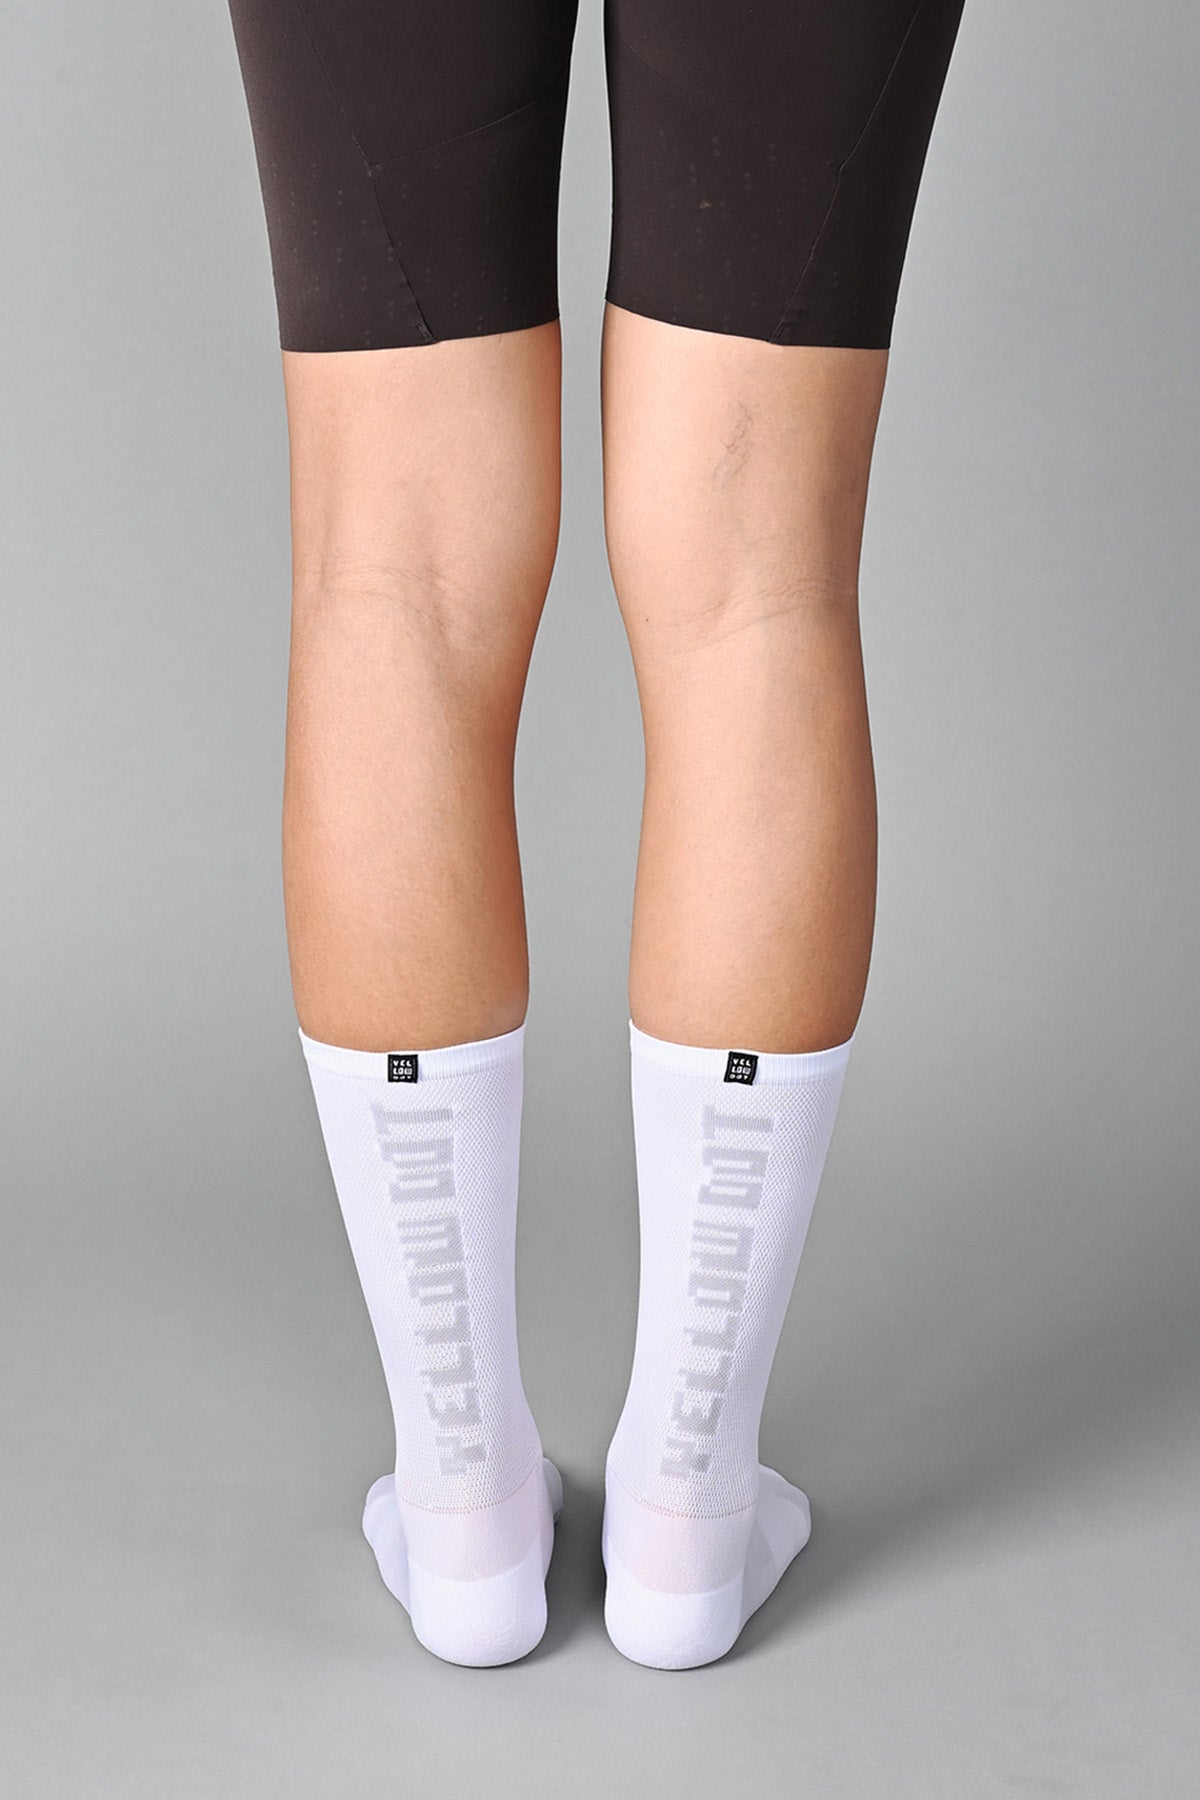 STEALTH - WHITE REAR | BEST CYCLING SOCKS